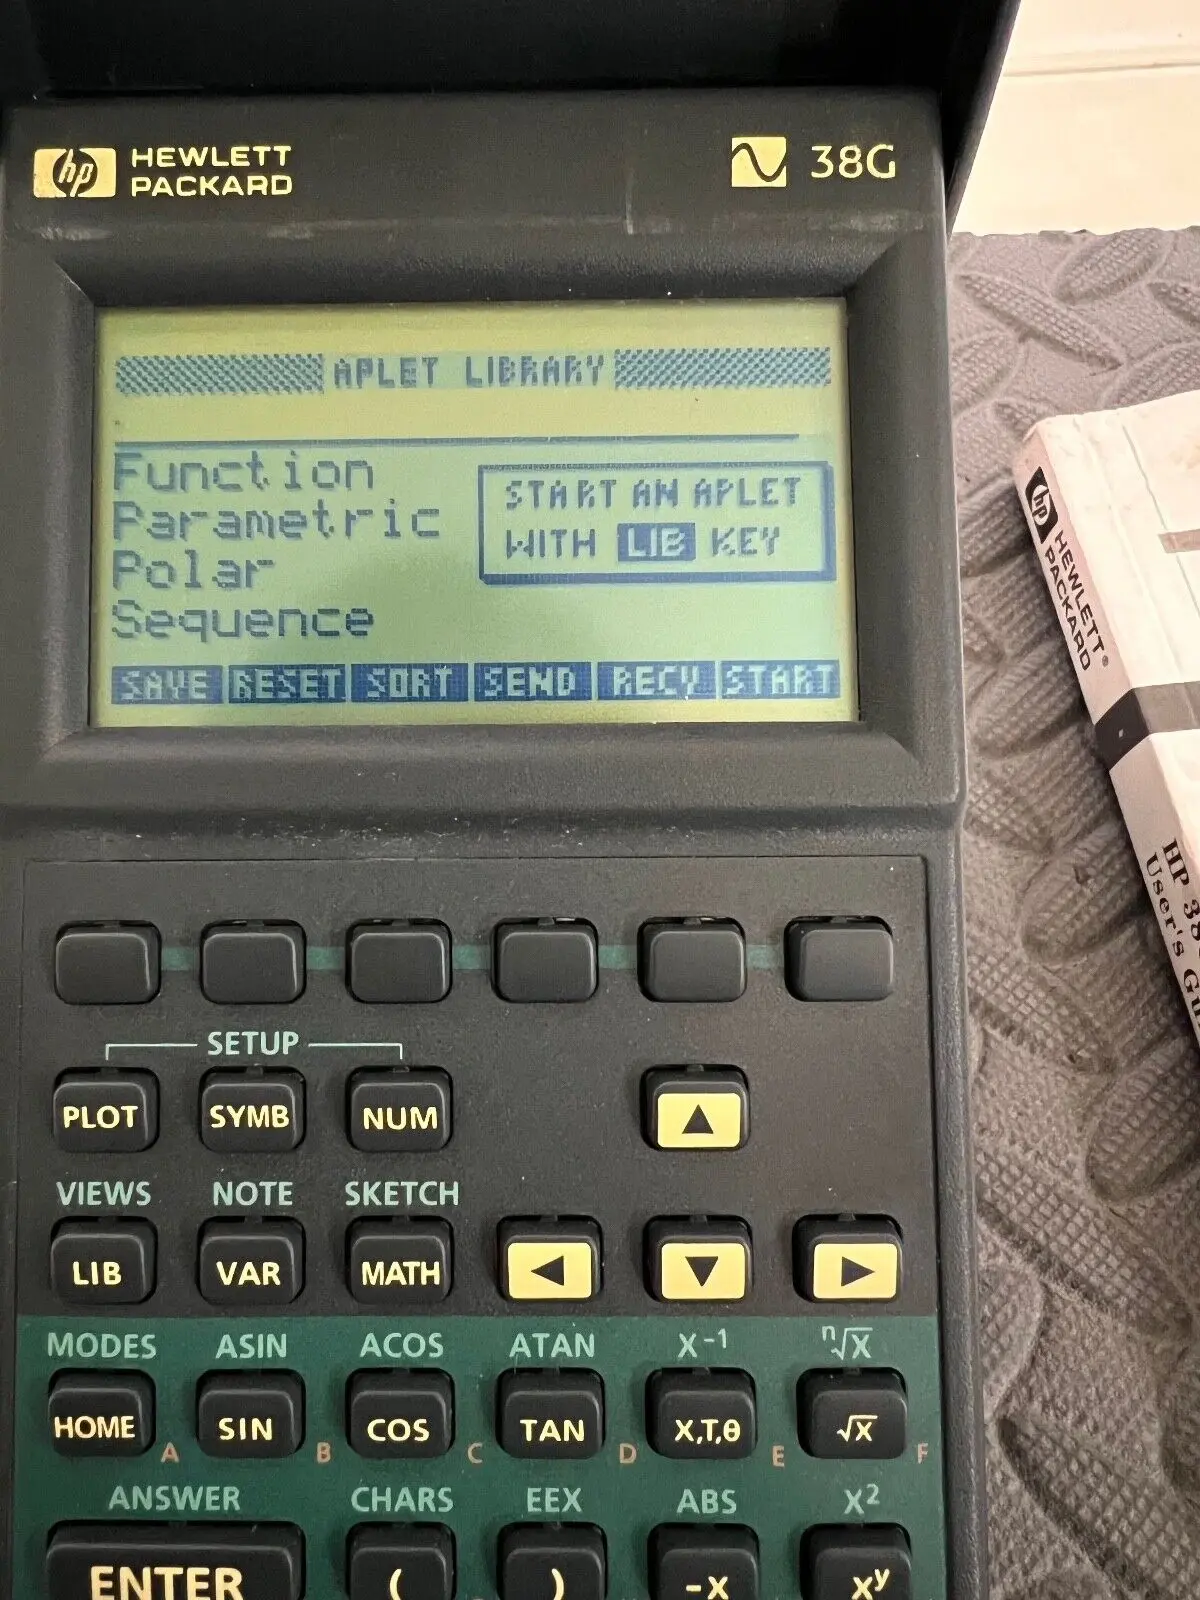 hewlett packard 38g graphing calculator - How do you graph on a graphing calculator